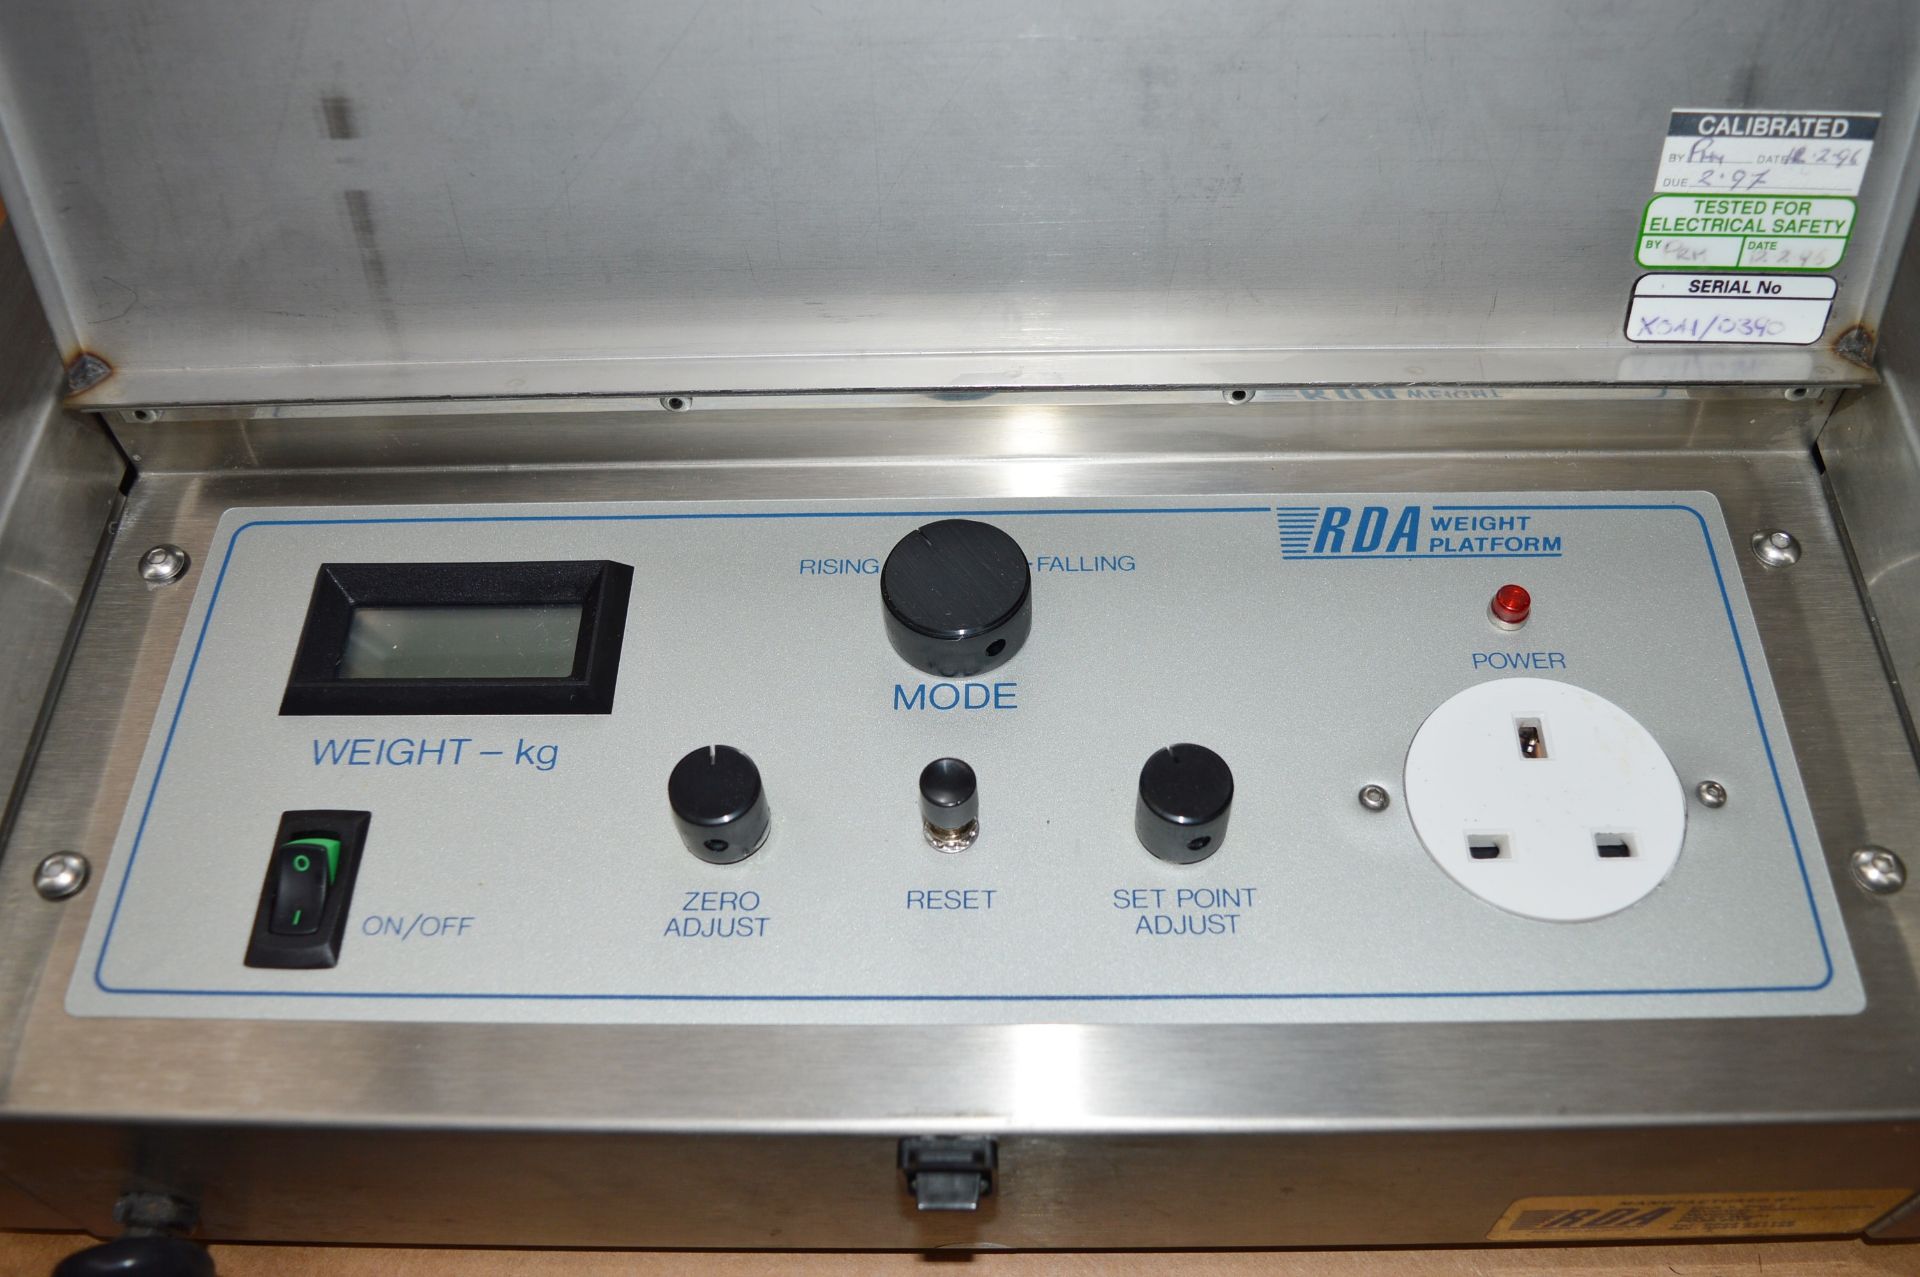 1 x RDA Professional Weight Platform Scale - CL011 - Designed For Refilling Refrigerant Cylinders, - Image 5 of 12